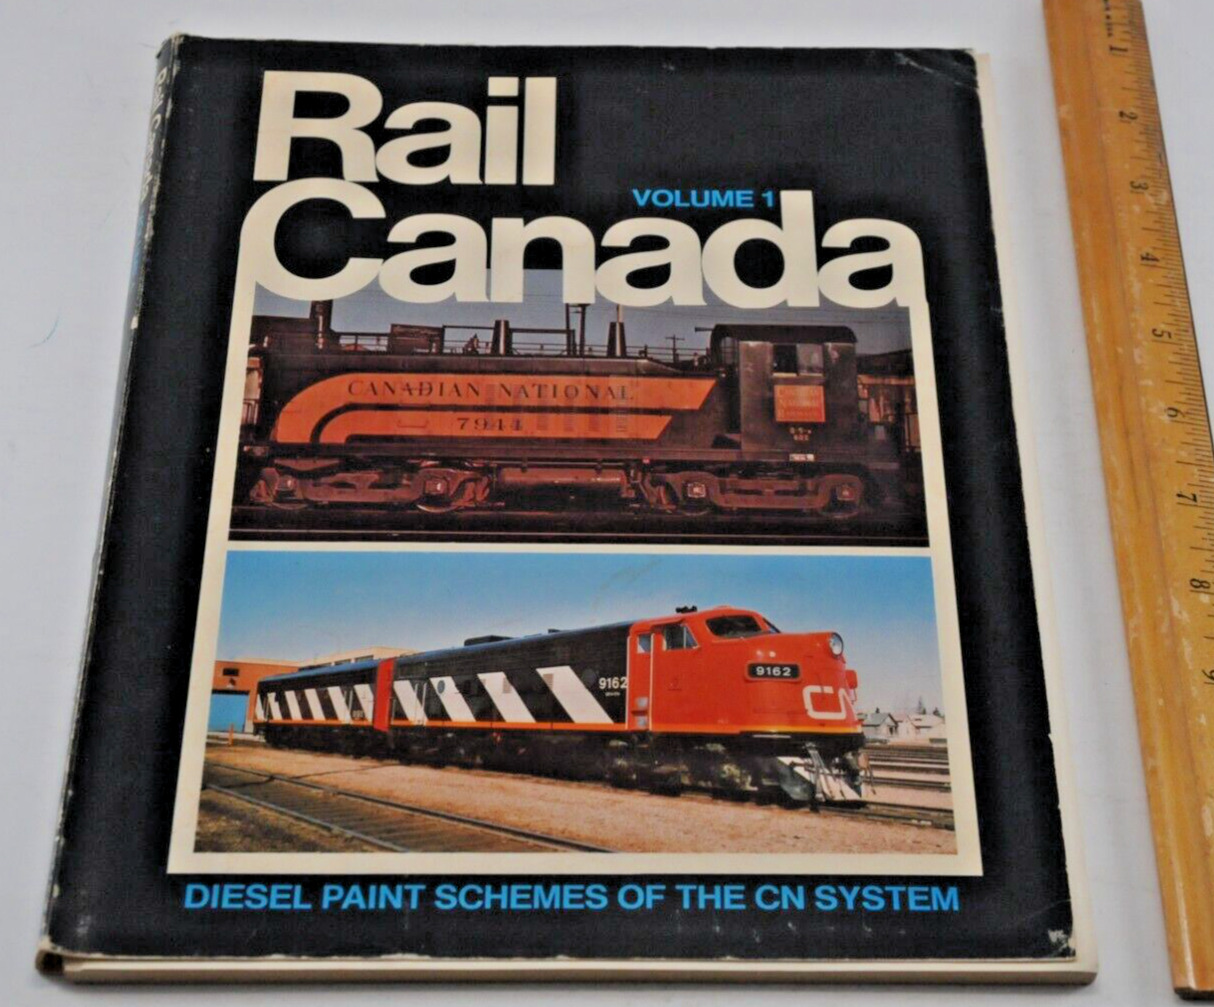 Rail Canada Volume 1 Diesel Paint Schemes of the CN System